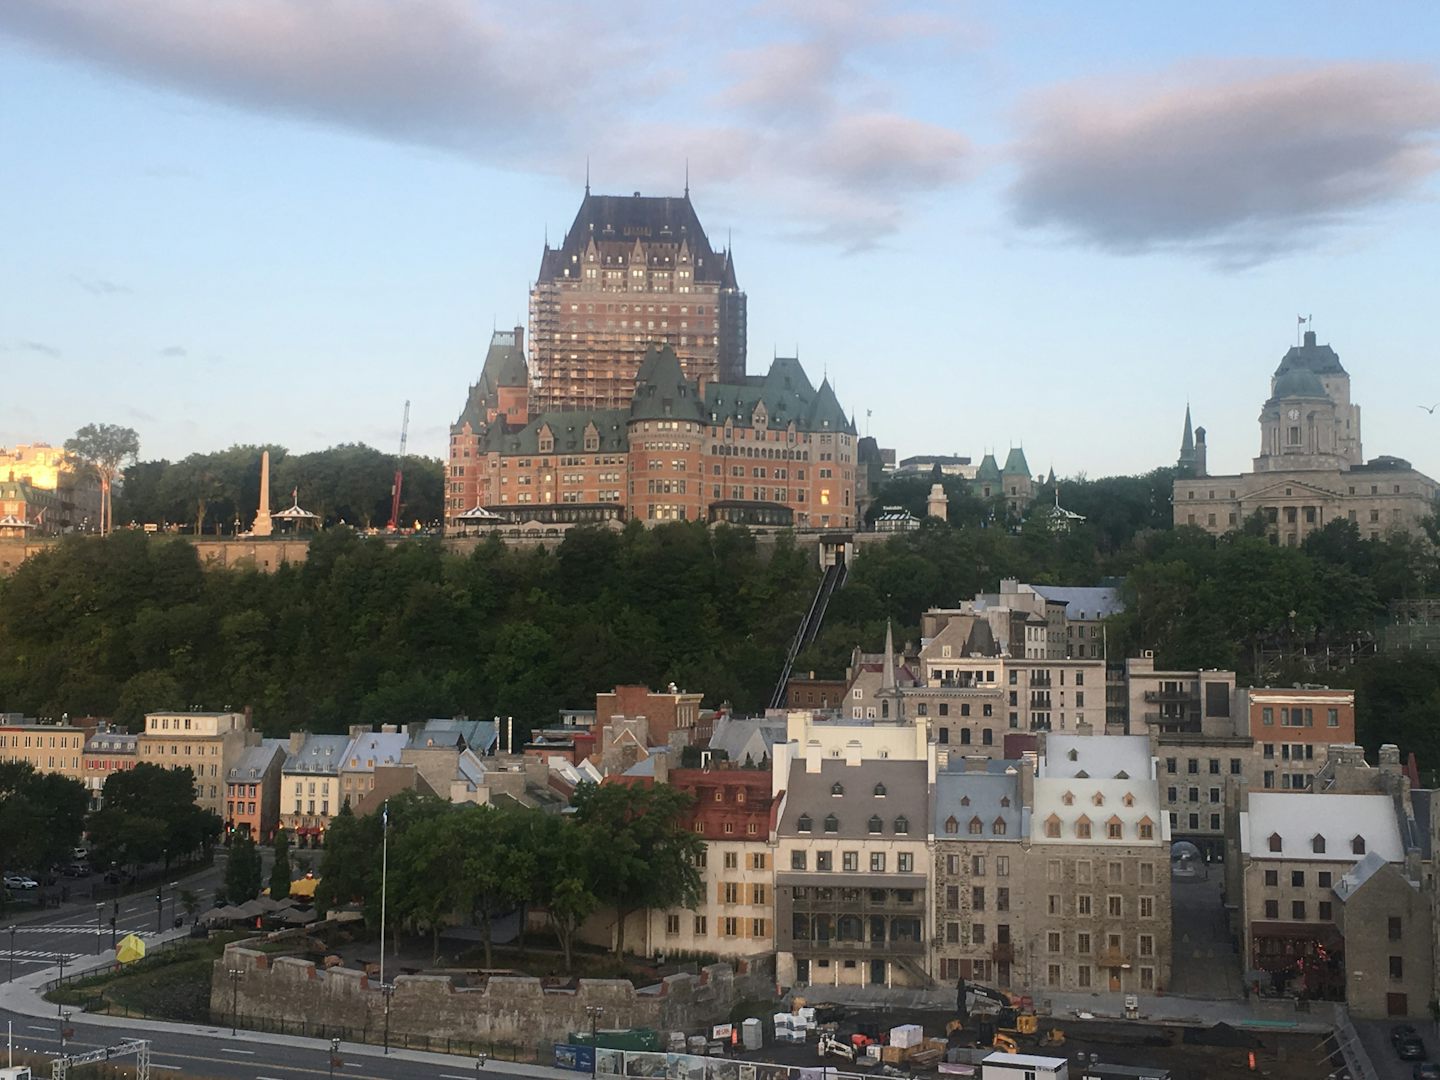 Our view during breakfast in Quebec,